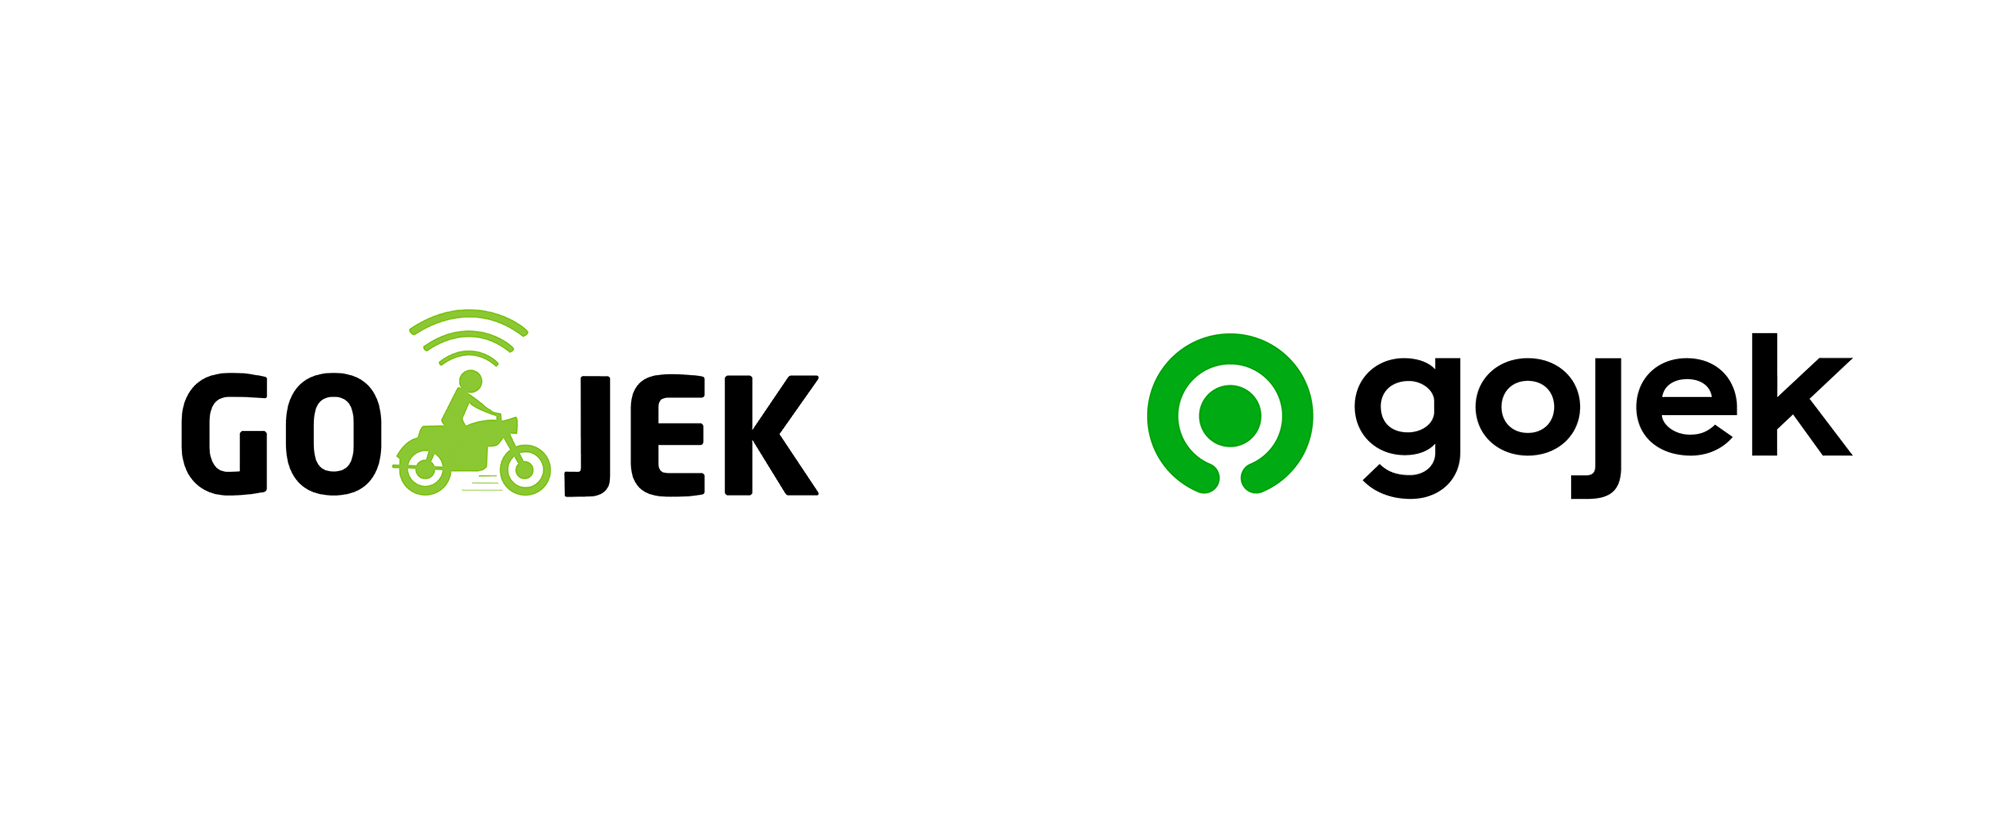 People.com Logo - Brand New: New Logo And Identity For Gojek Done In House